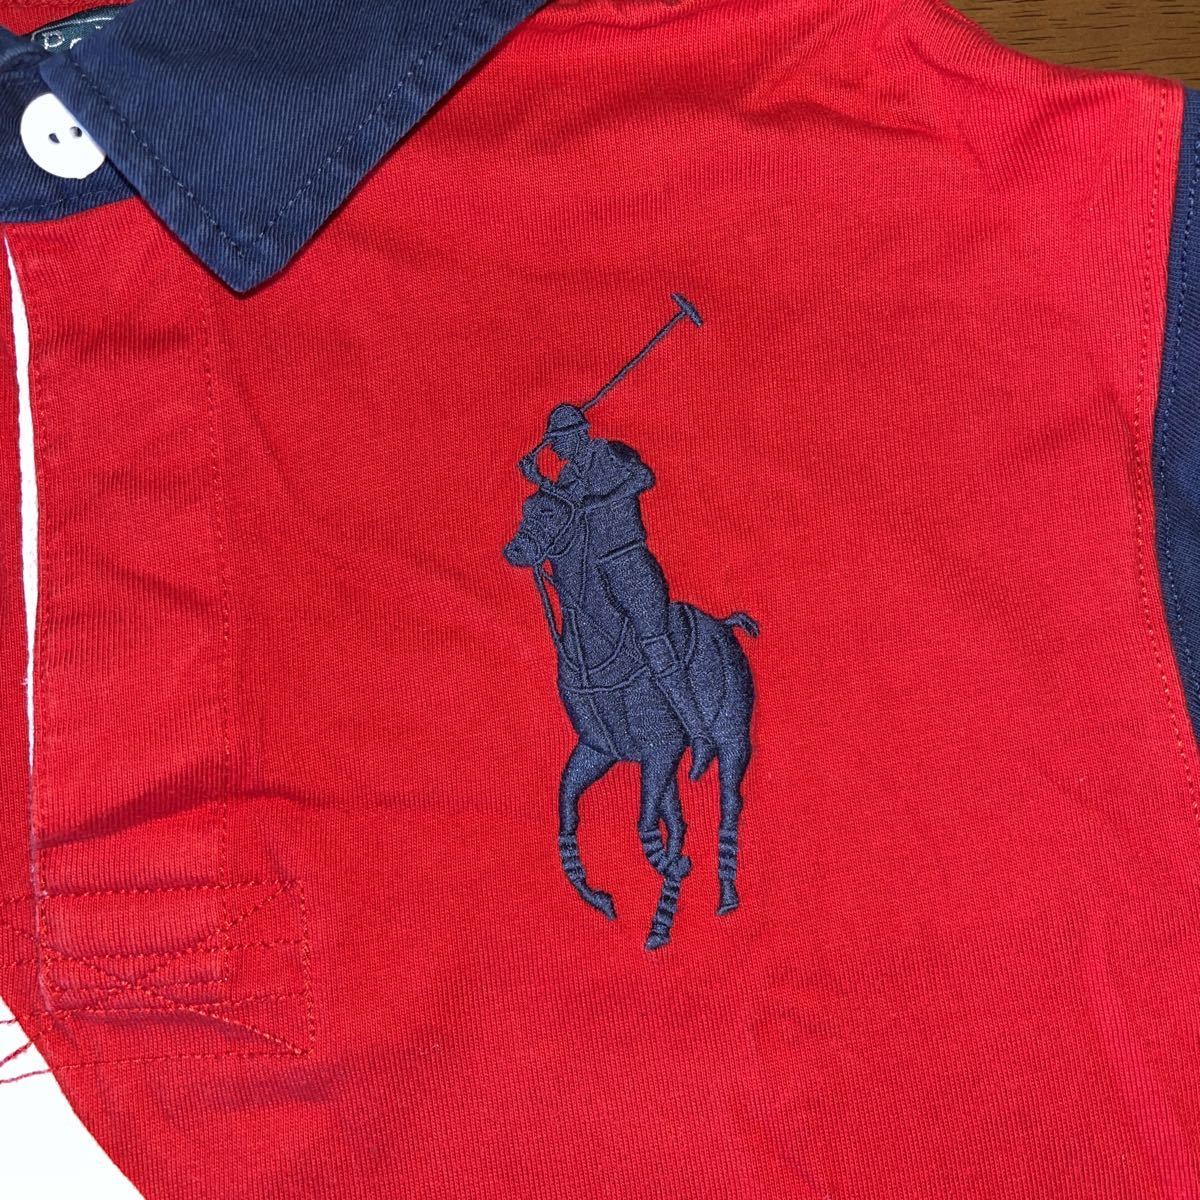 [RALPH LAUREN/ Ralph Lauren ] Rugger shirt polo-shirt with long sleeves M size /150.(10-12) big po knee used with defect 